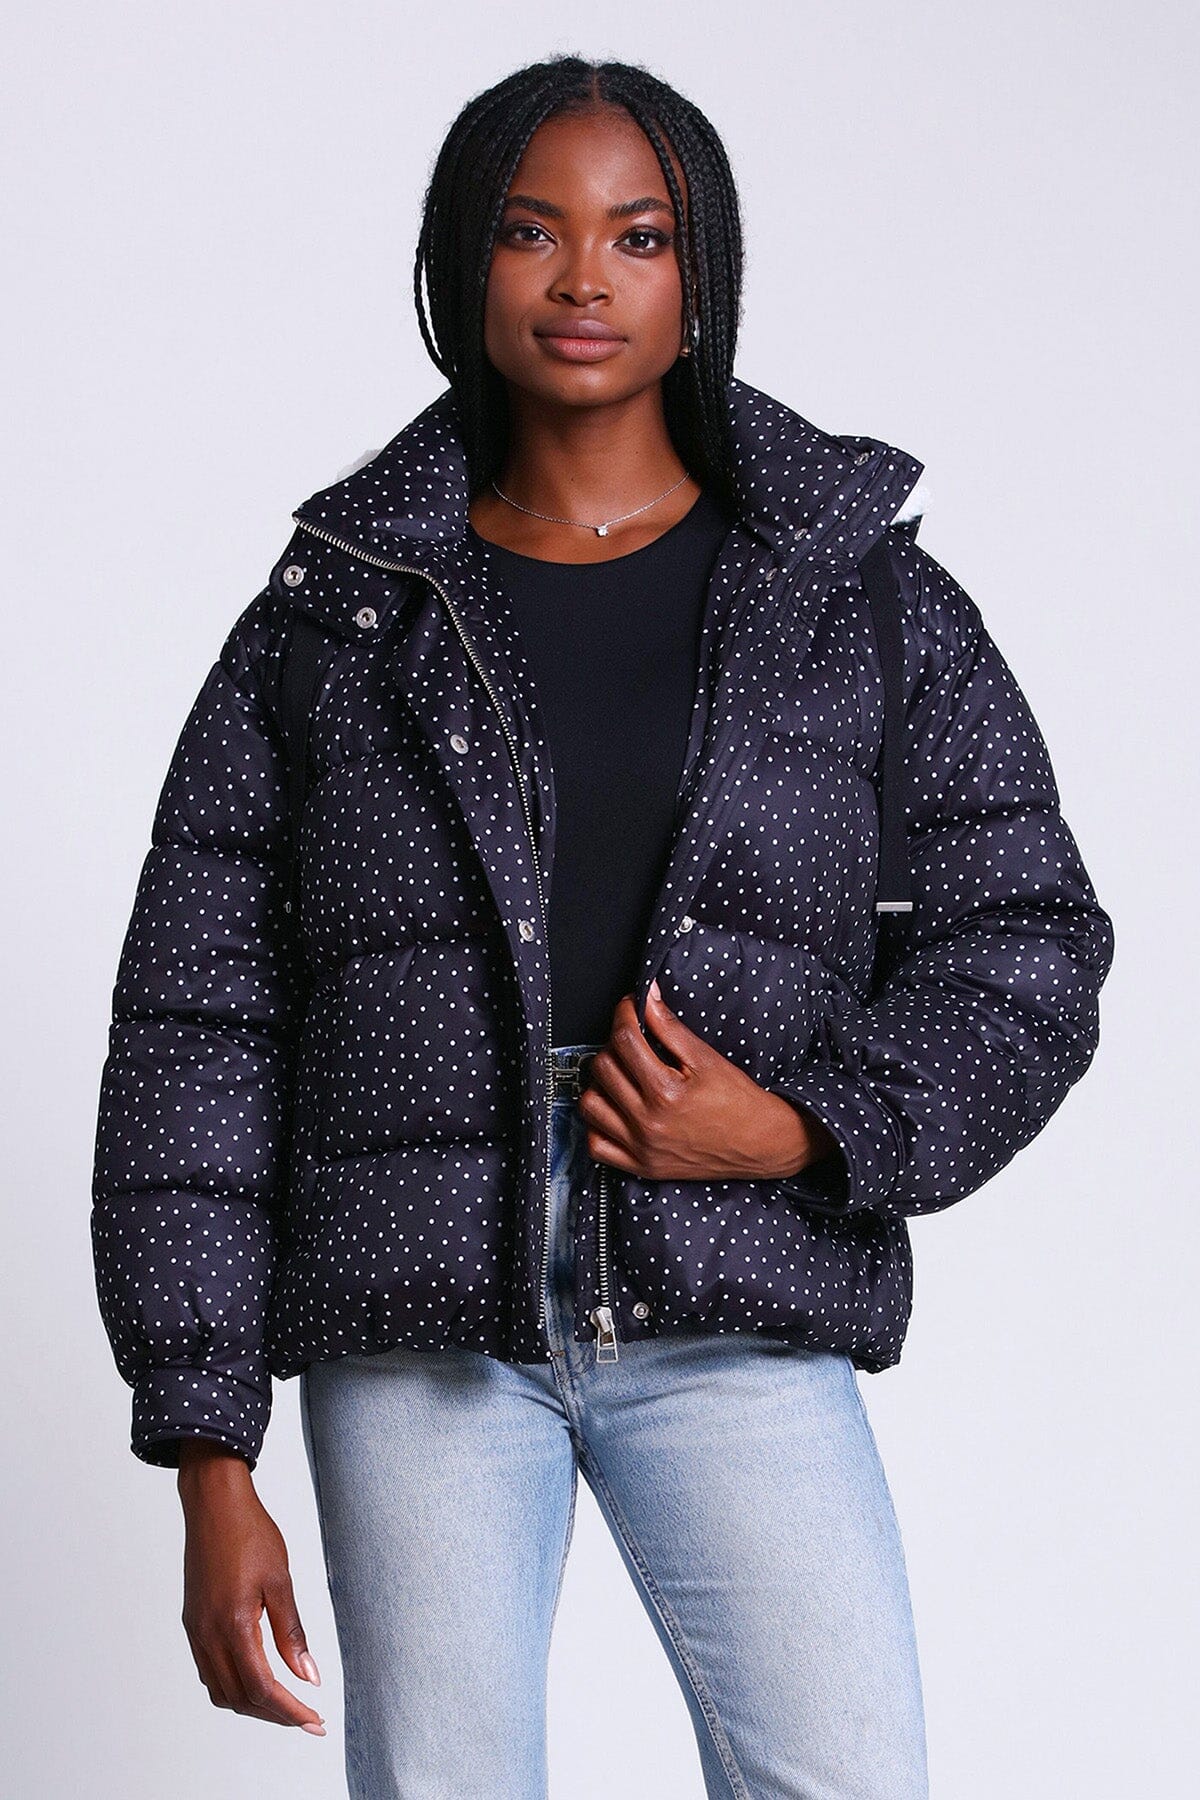 printed thermal puff hooded puffer jacket coat black and white polka dots - women's figure flattering office to date night puffers outerwear